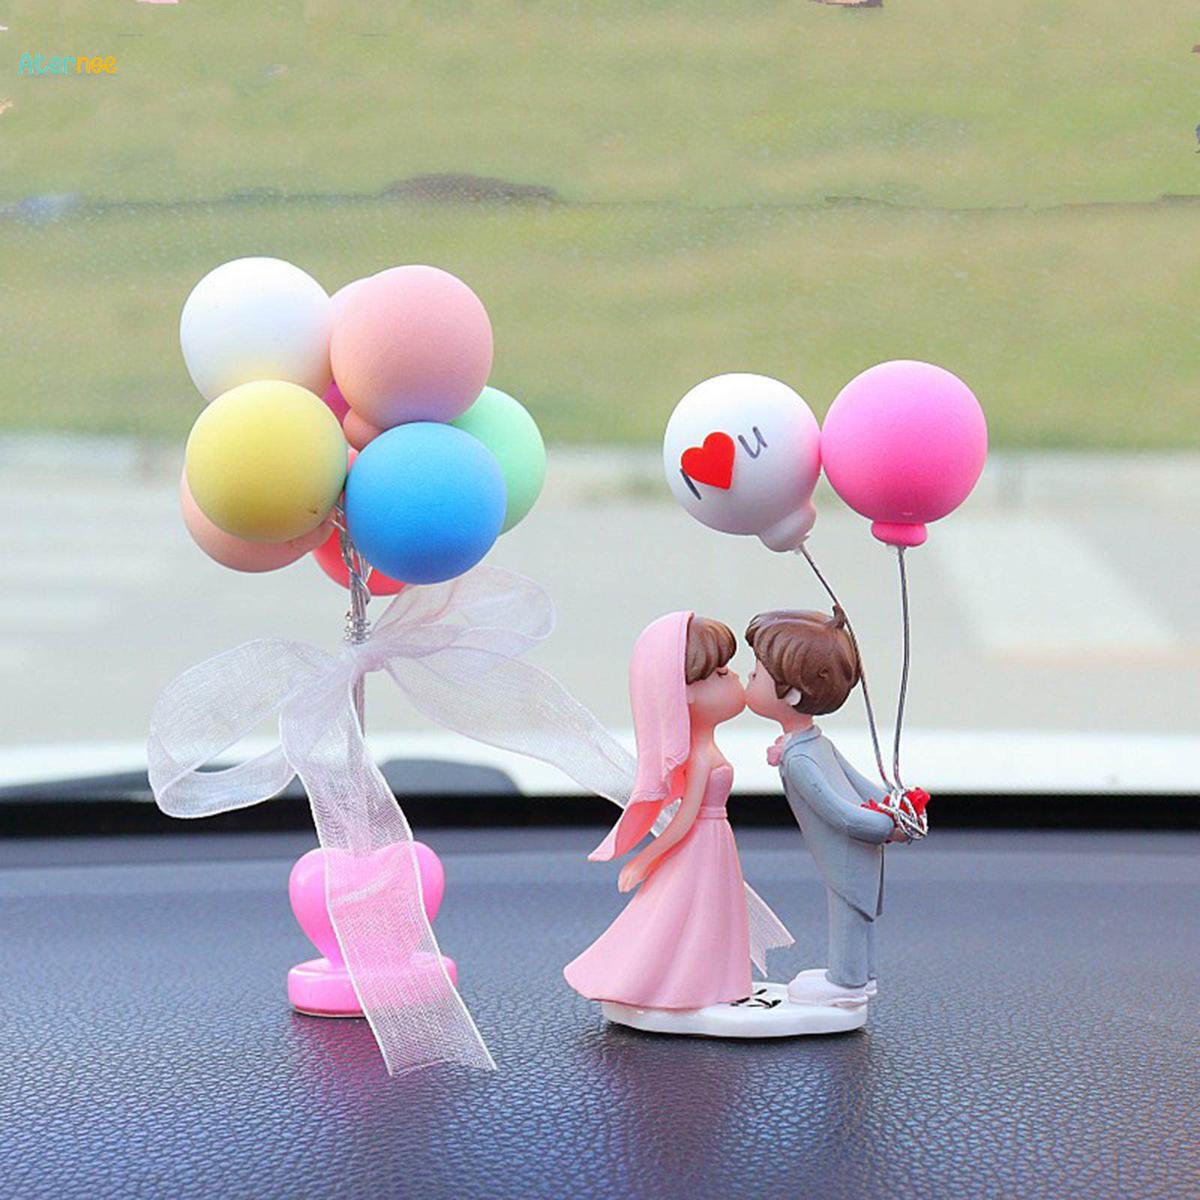 Cute Cartoon Couples Action Figure, Figurines Balloon Ornament, Car  Decoration Auto Interior Dashboard Accessories for Girls Gifts